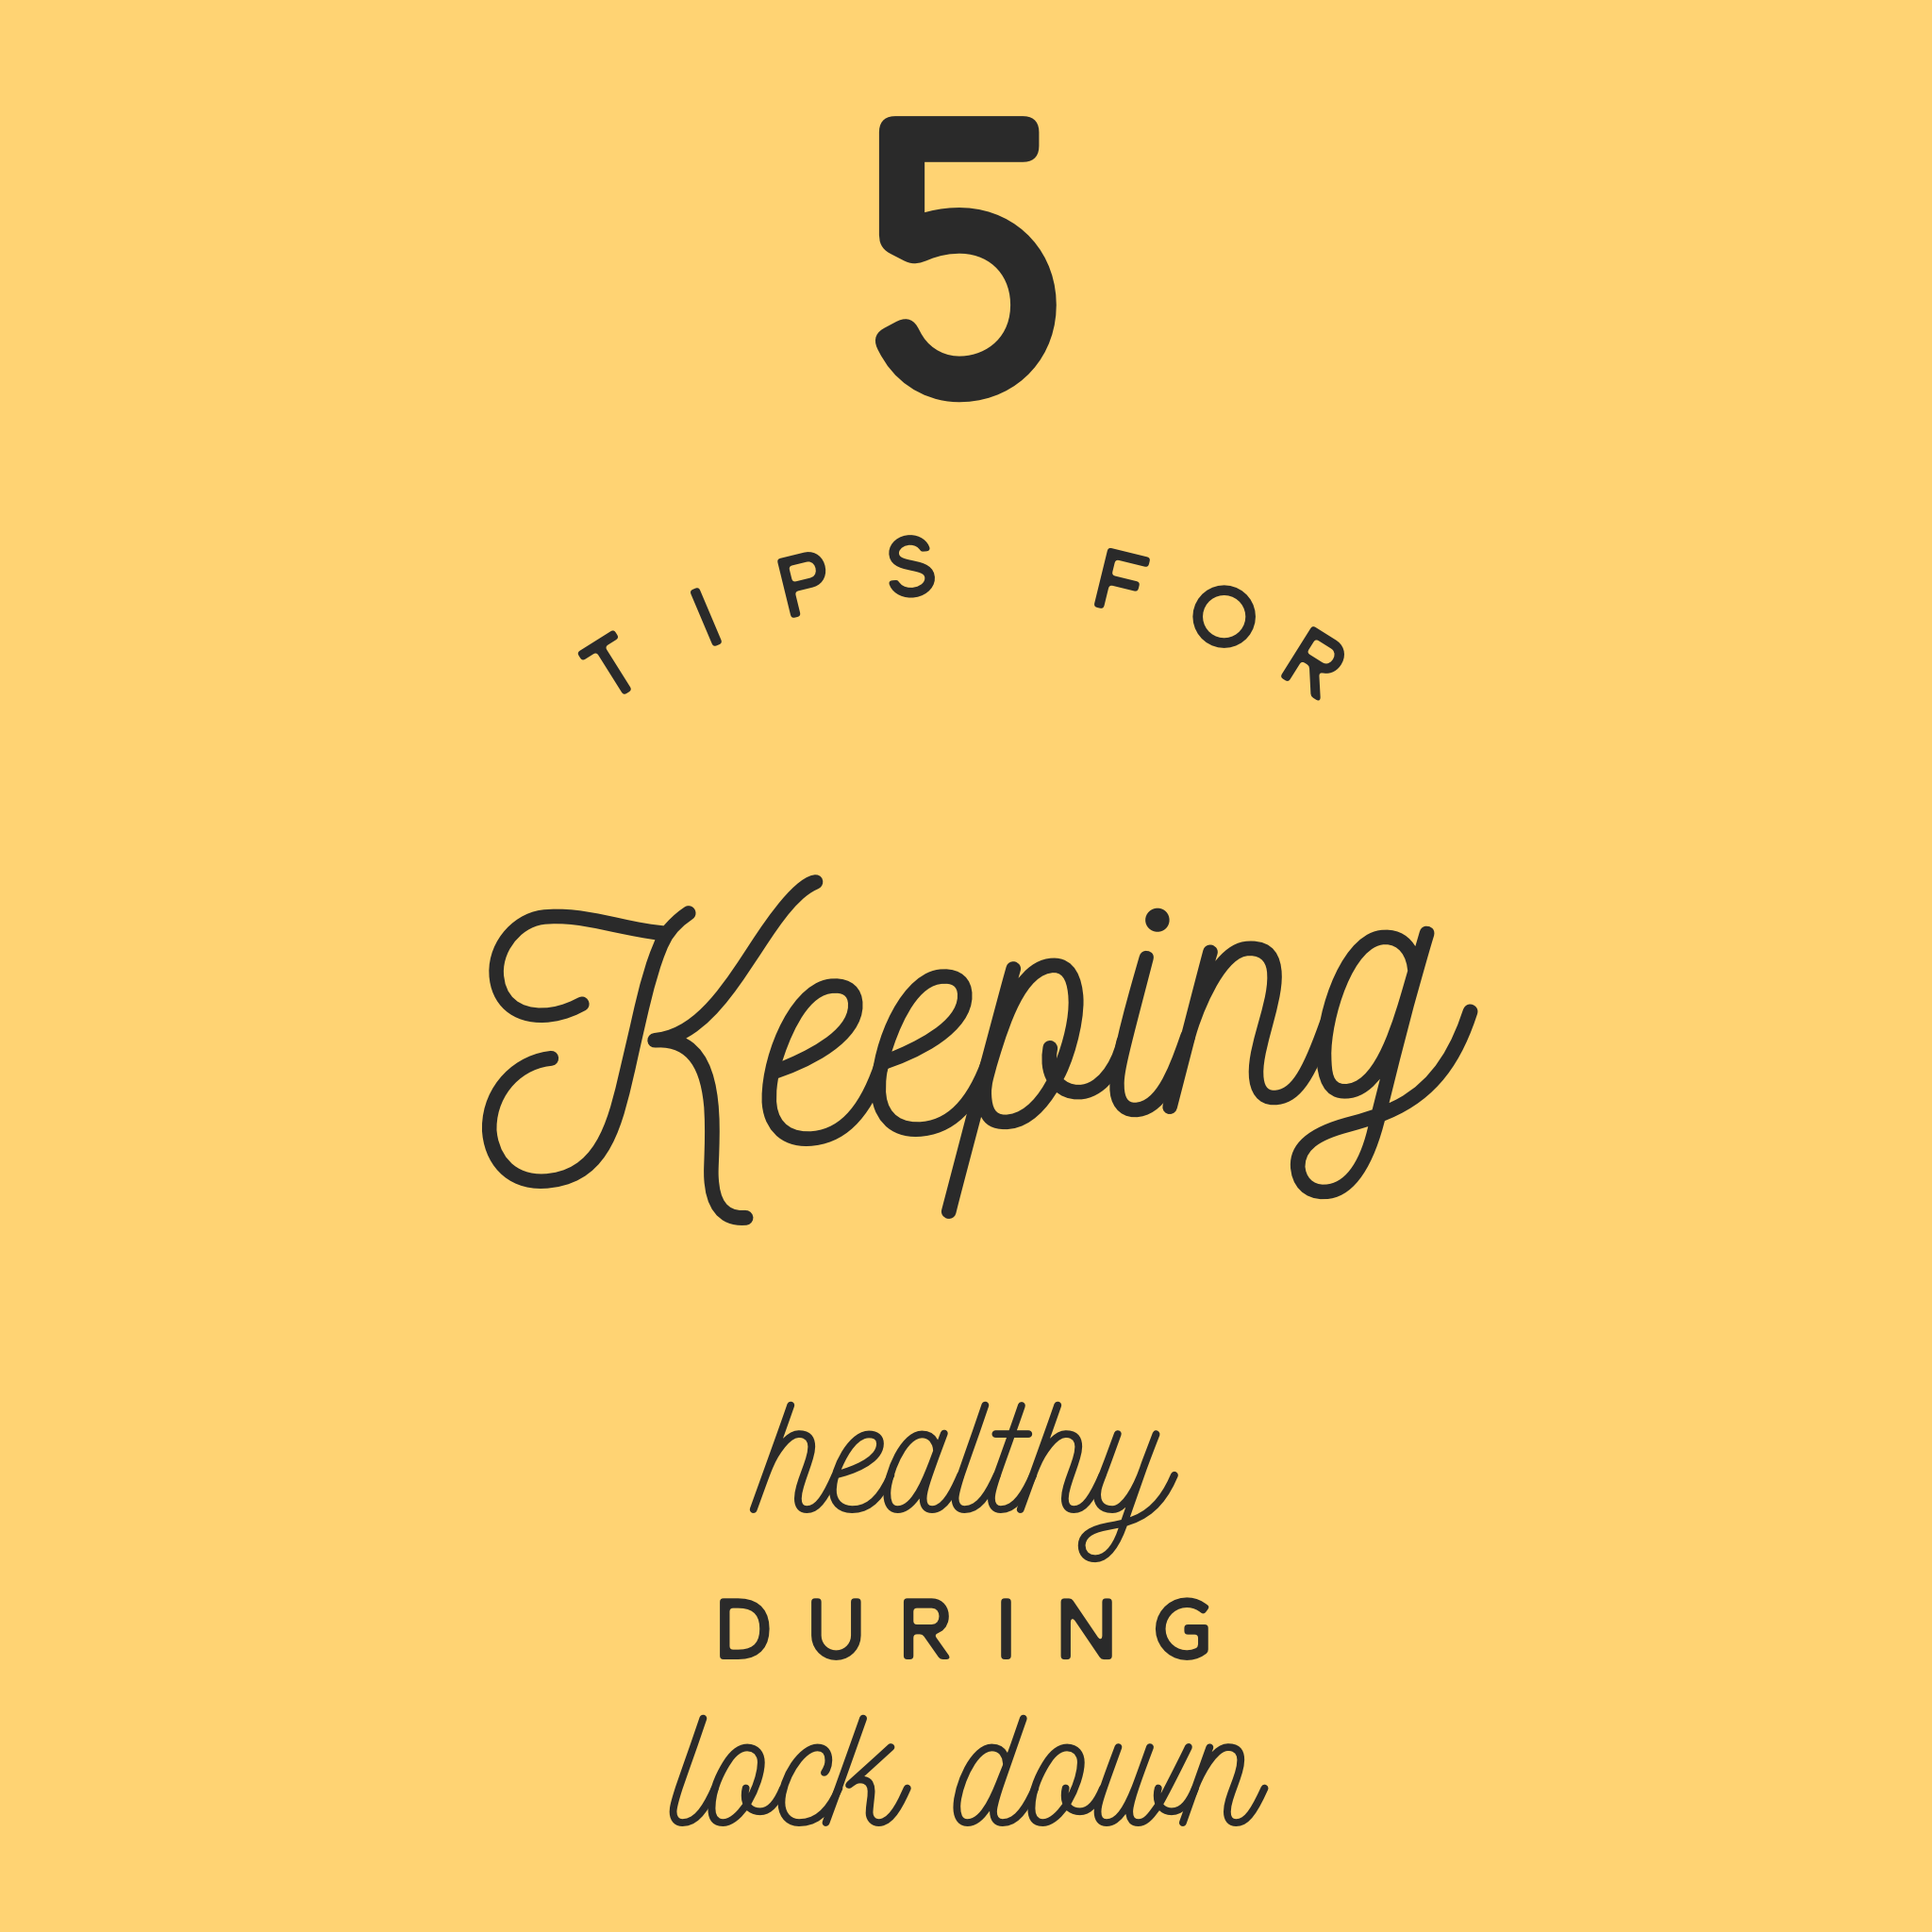 Weekly Tip - 5 Tips for keeping healthy during lockdown